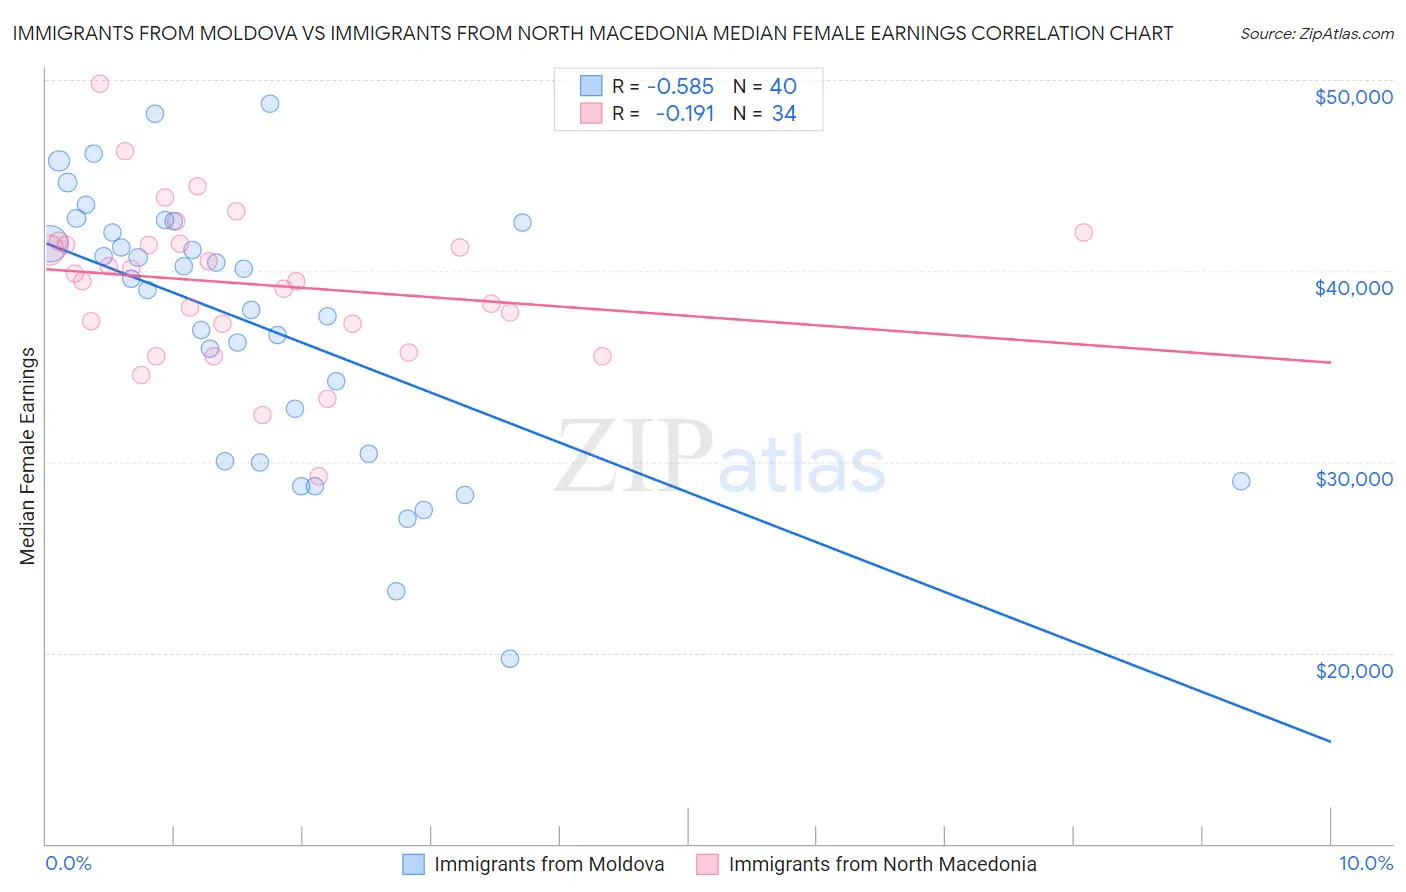 Immigrants from Moldova vs Immigrants from North Macedonia Median Female Earnings